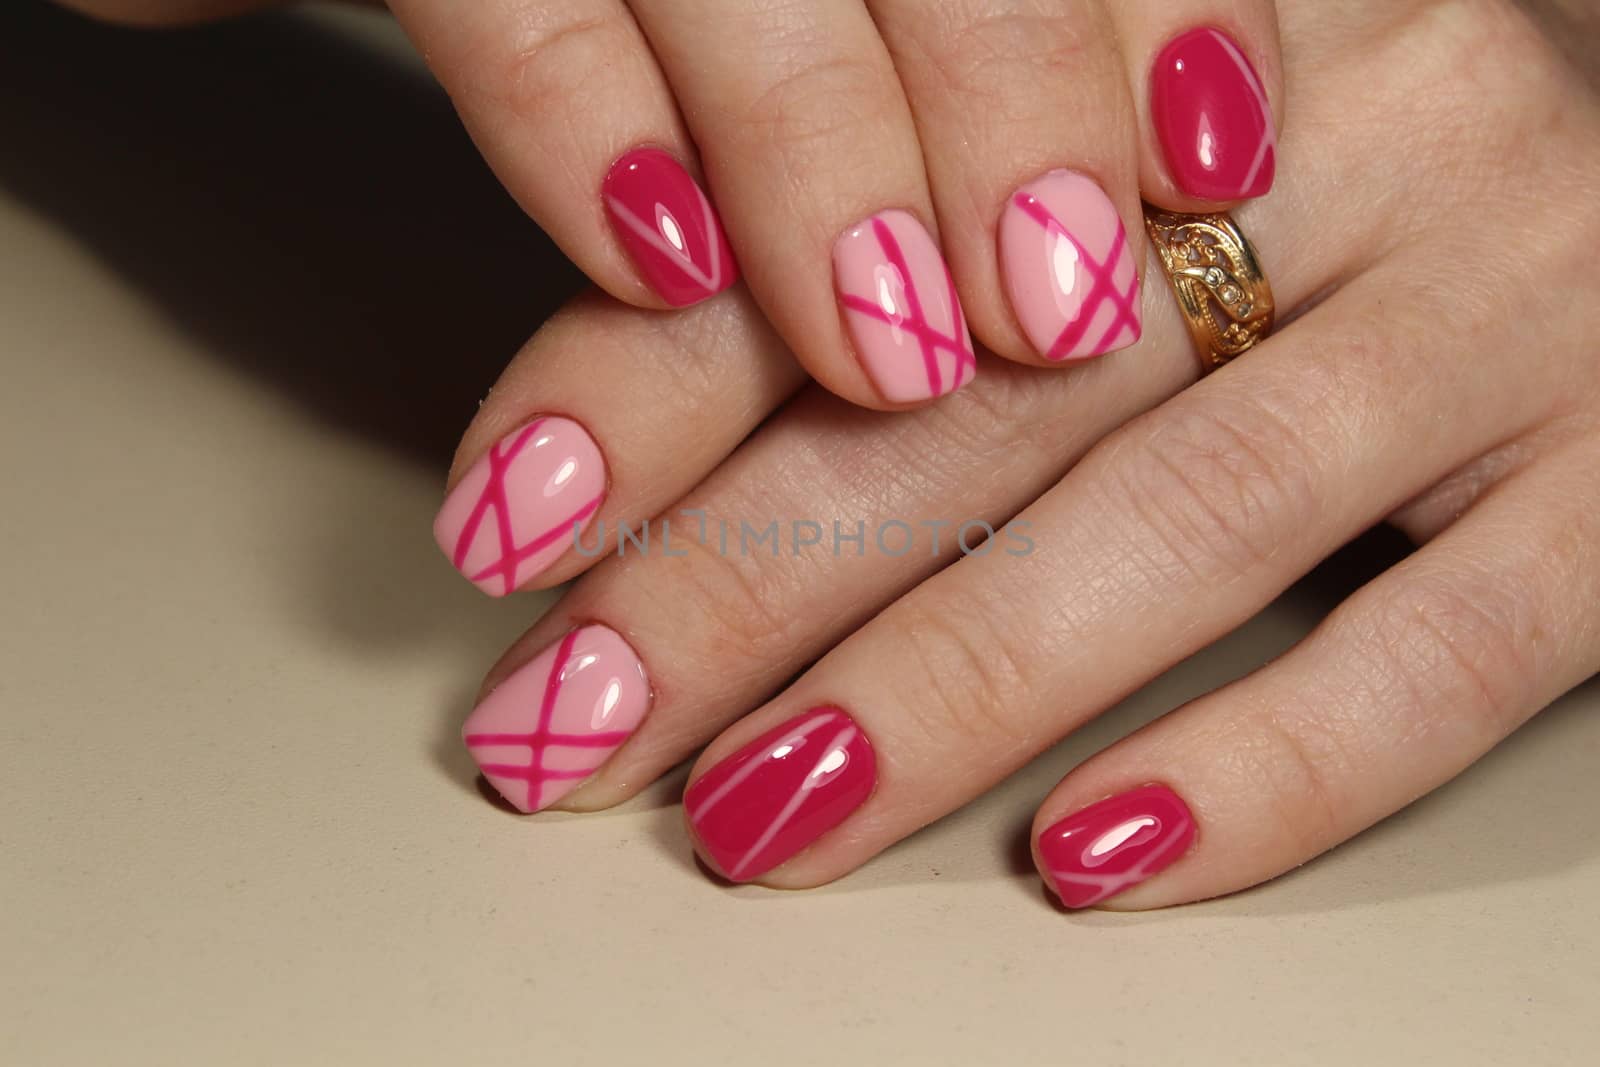 Manicure nails pink by SmirMaxStock